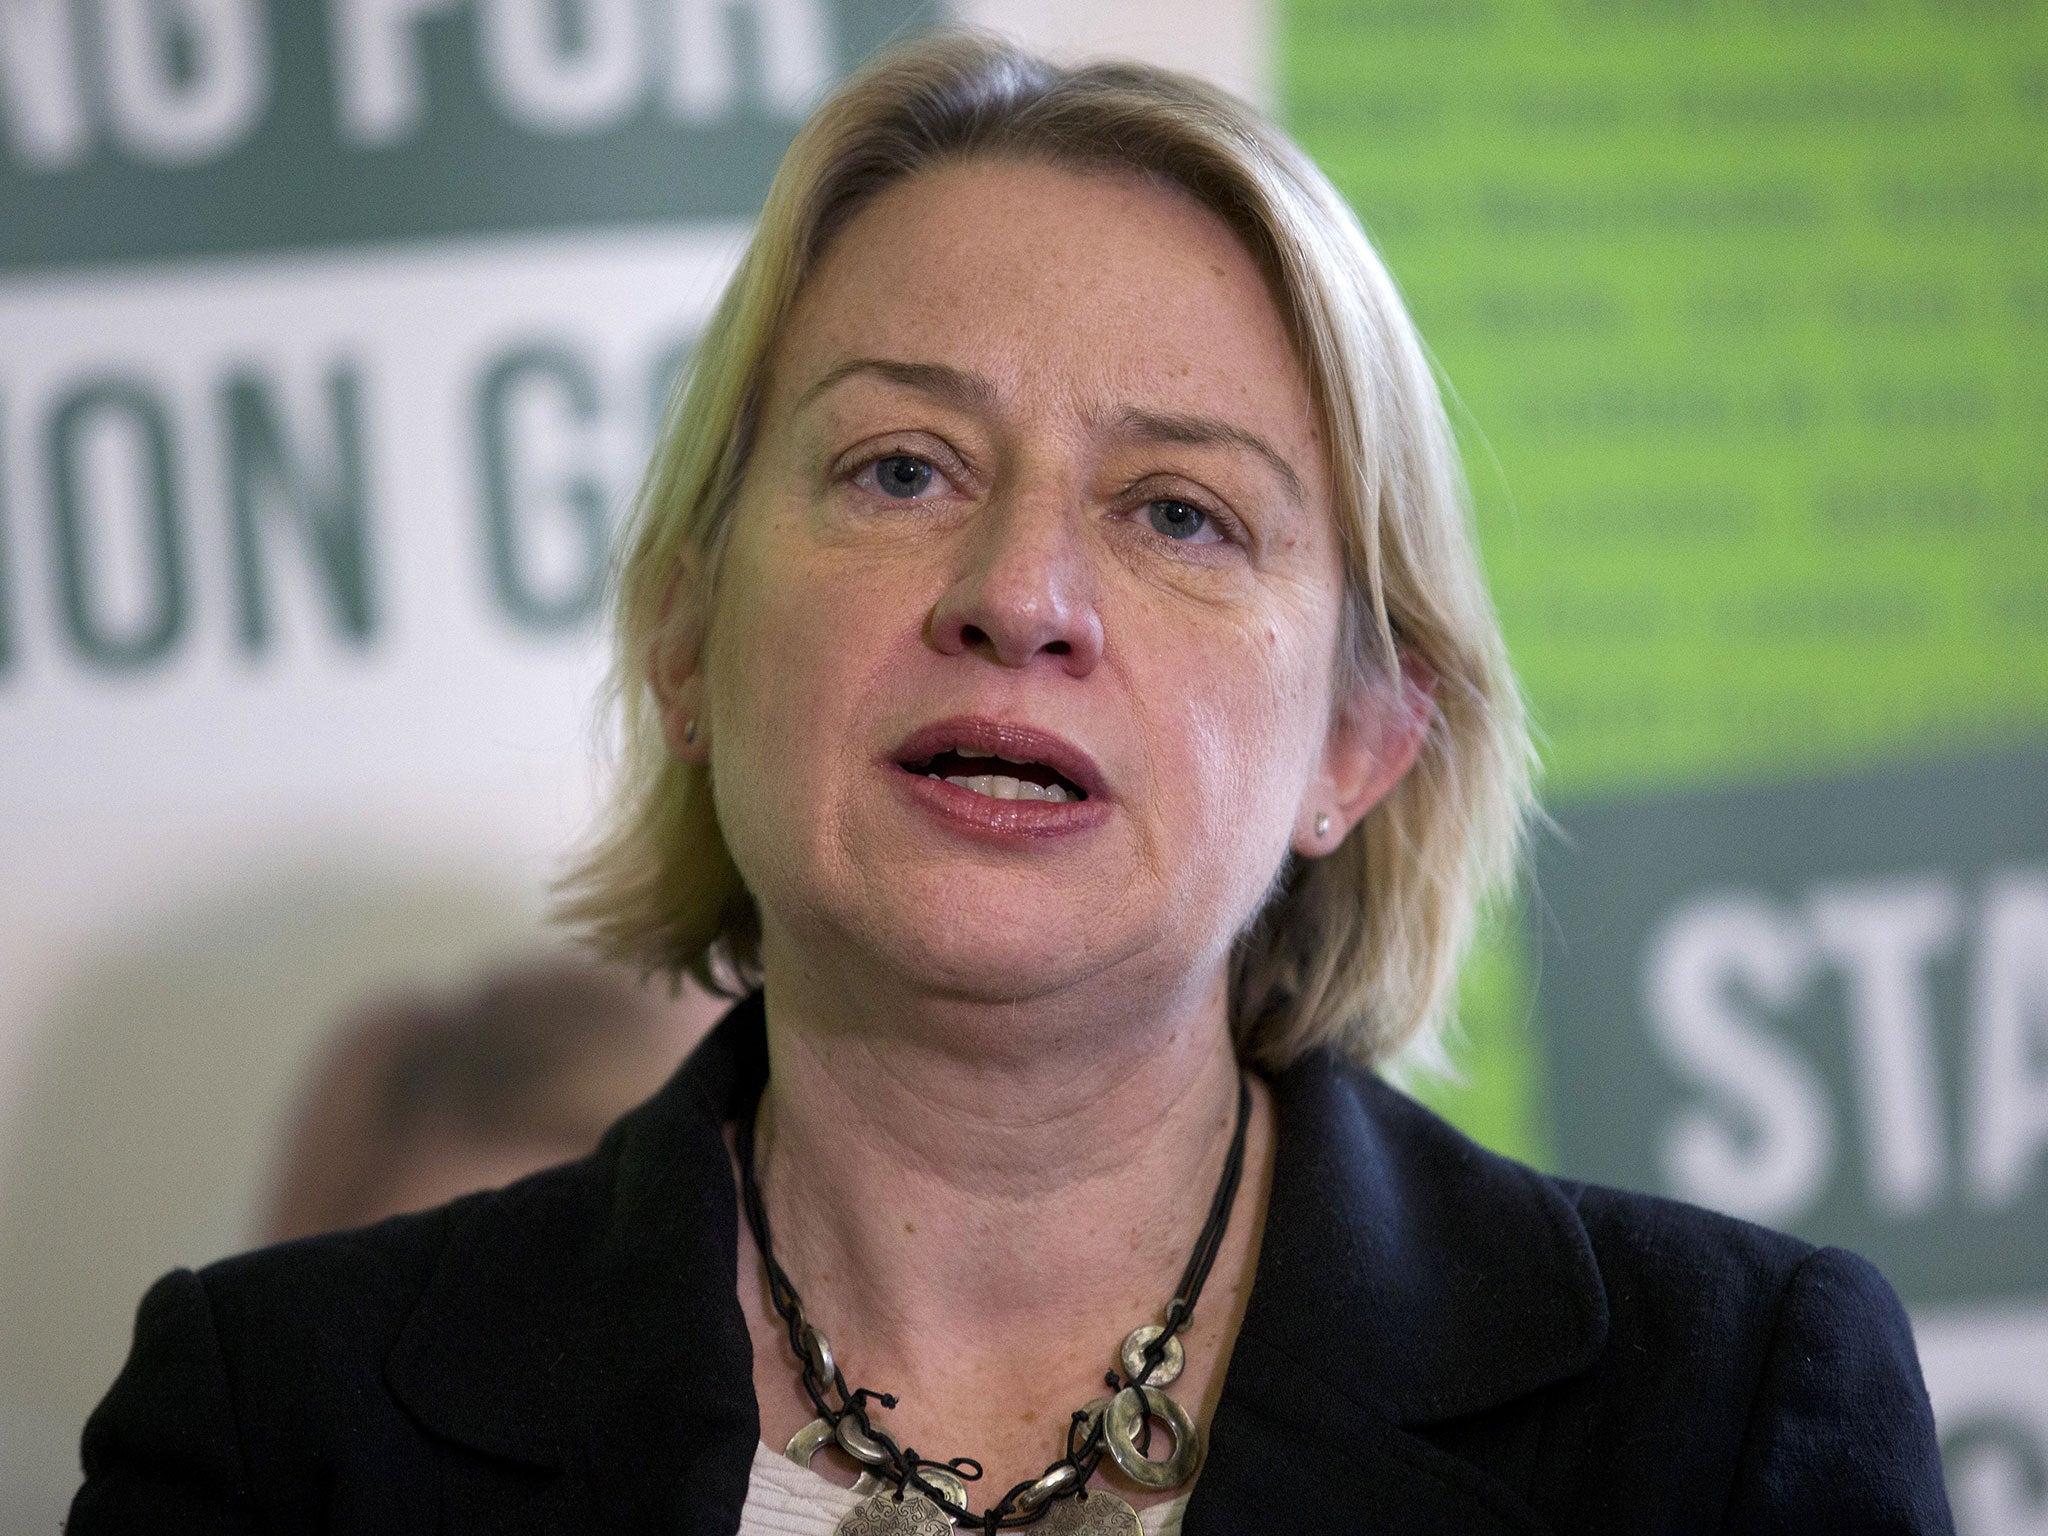 Green Party leader Natalie Bennett has received media training following an "excruciating" interview